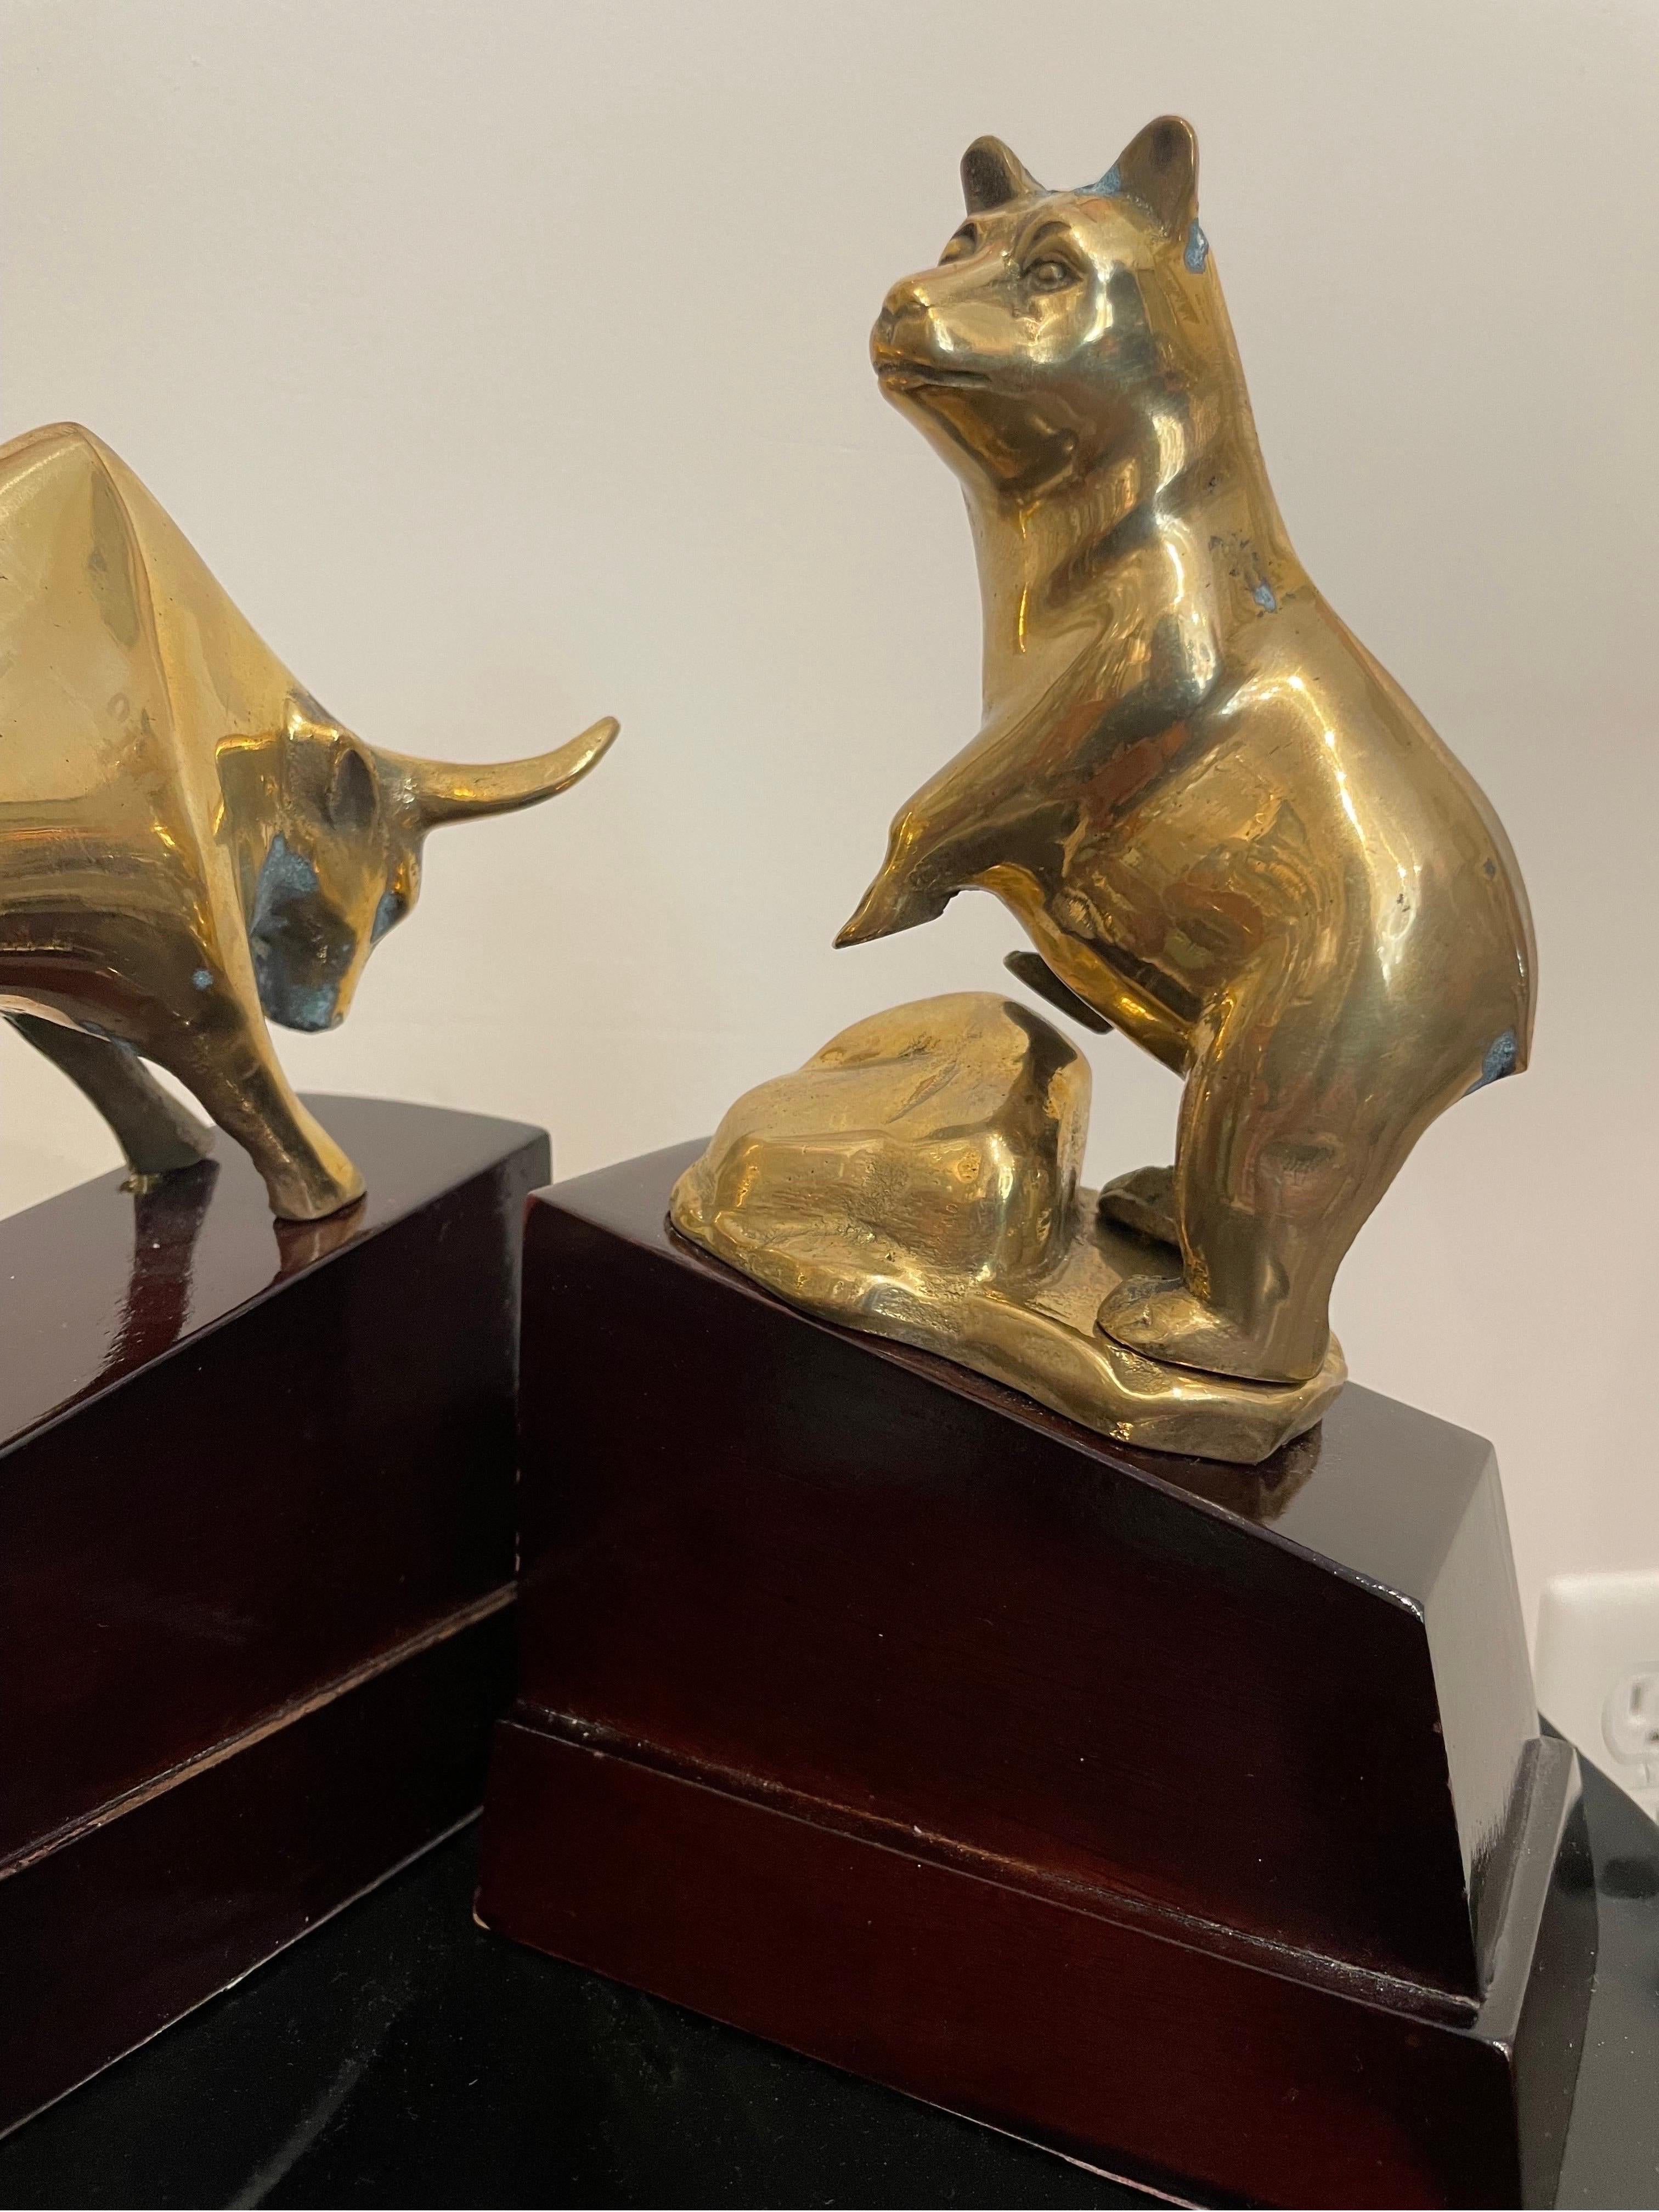 Vintage 1970's Classic Bear & Bull brass bookends on wood bases. The bull is in a charging position, while the bear is standing upright.